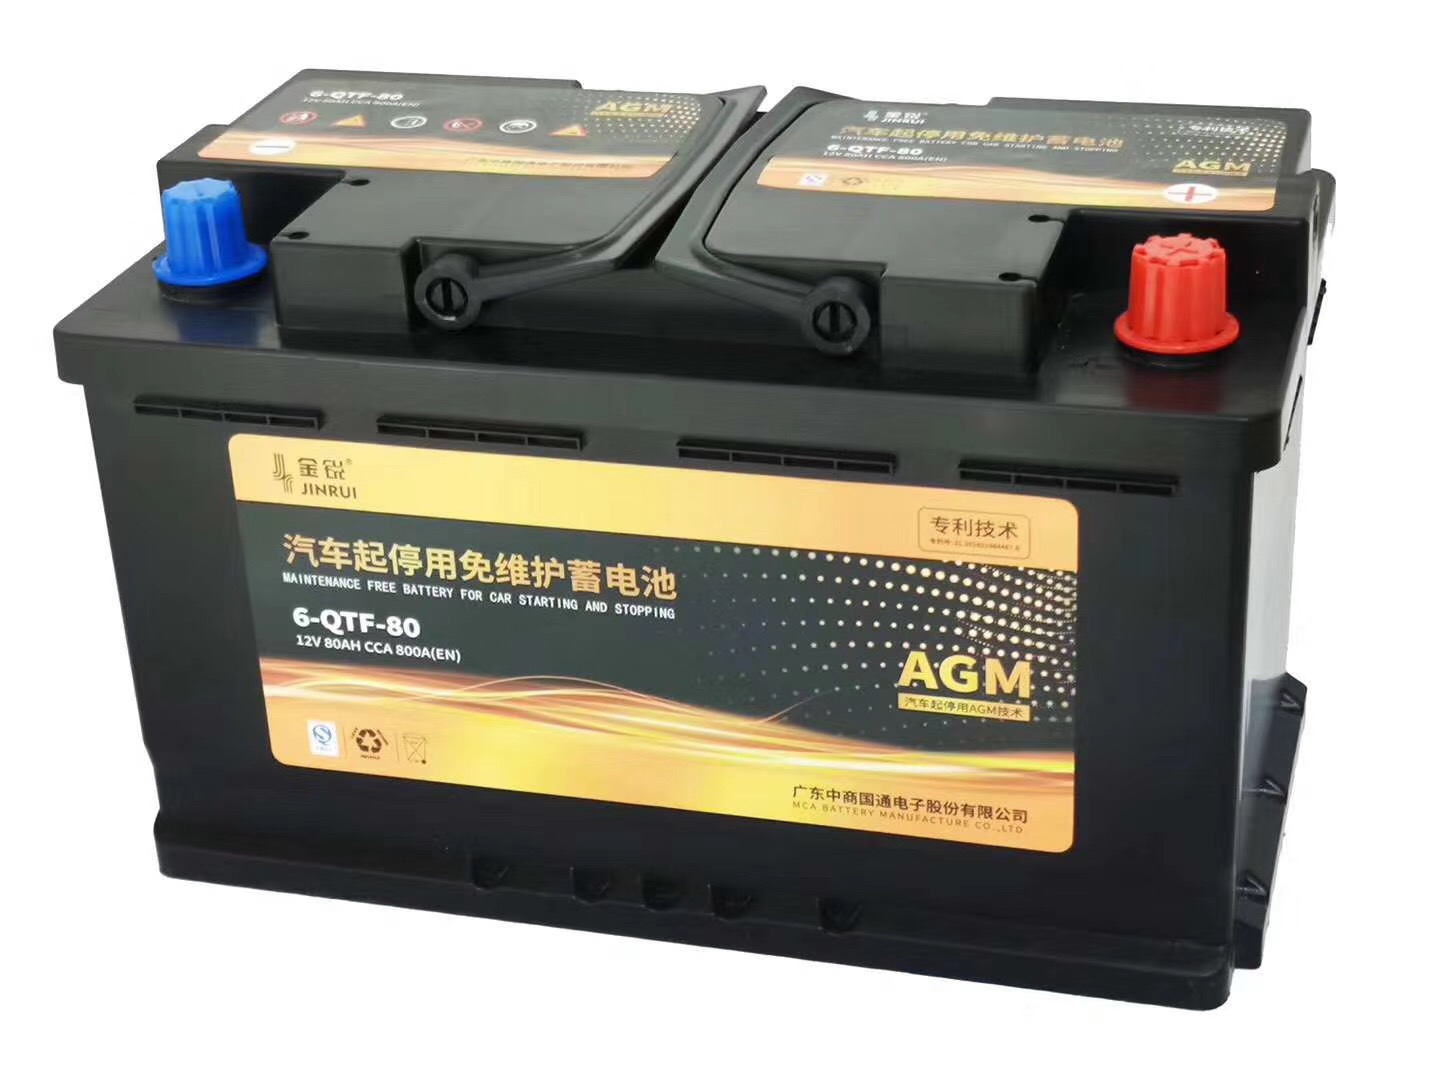 Hybrid 12V 80ah car Agm Start-Stop Battery from China manufacturer - MCA  Battery Manufacture Co., Ltd